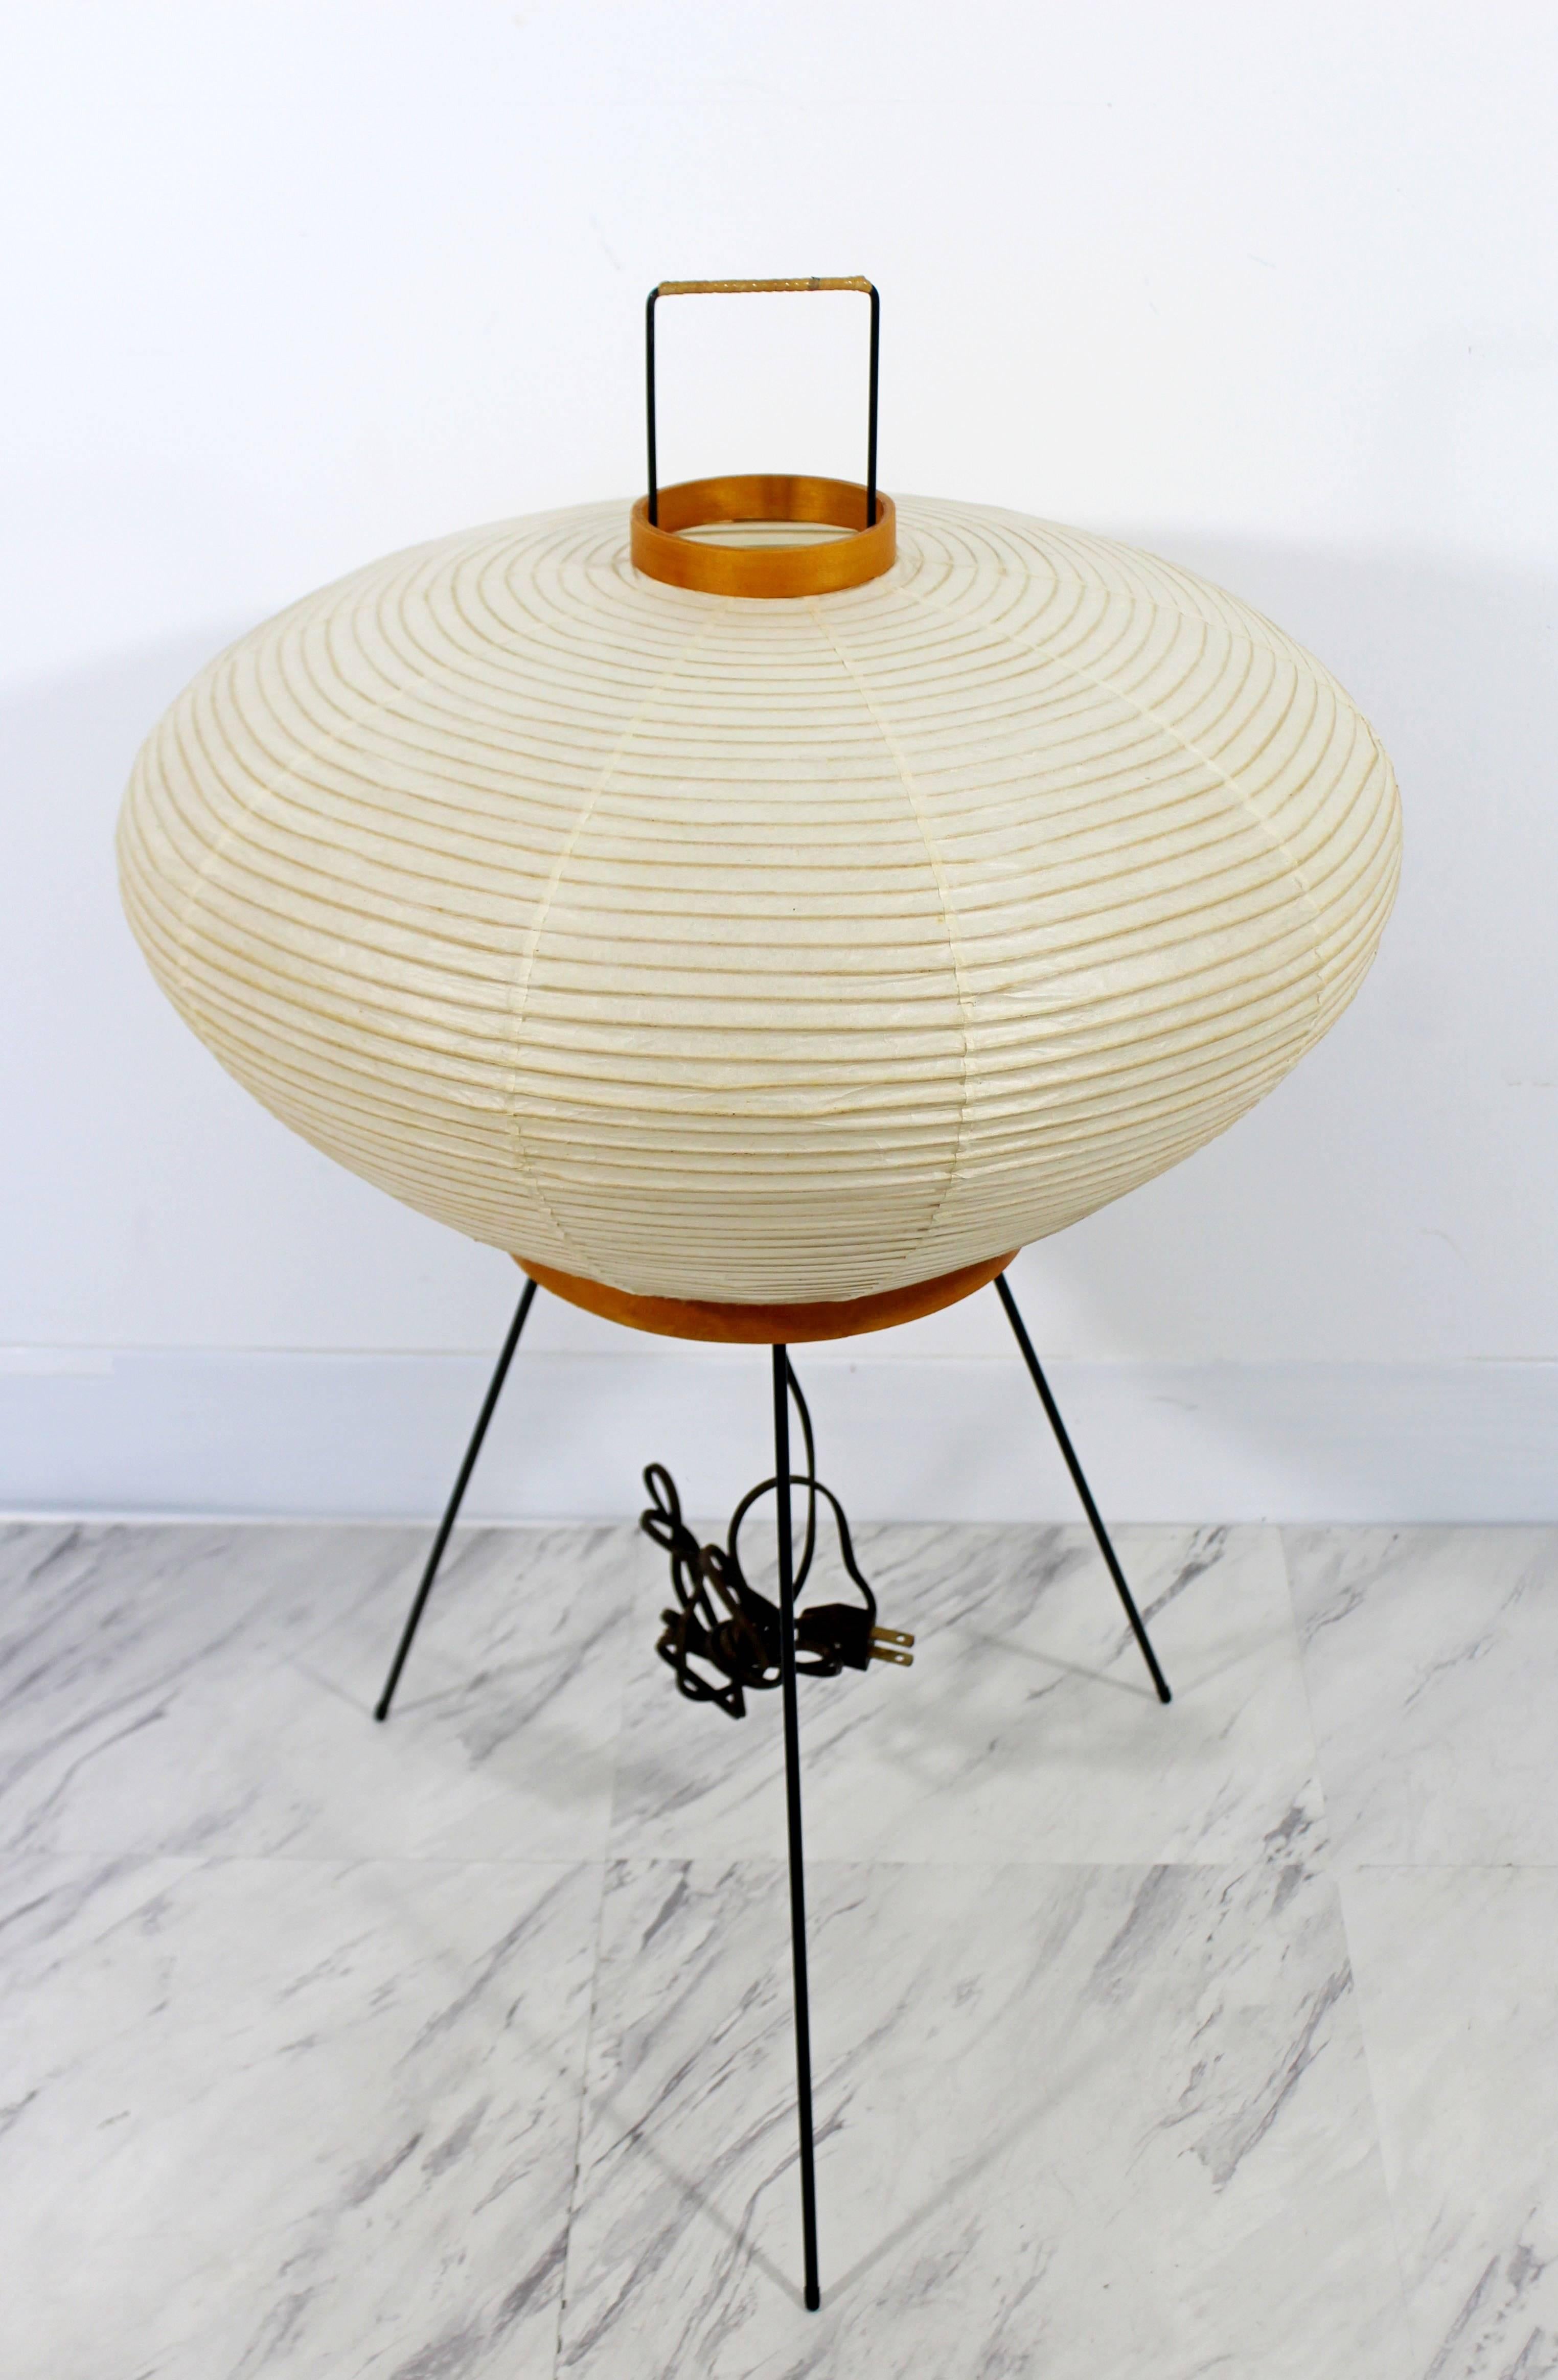 For your consideration is a sensational, original Akari 10A floor lamp by Isamu Noguchi, circa the 1950s. In excellent condition. The dimensions are 18